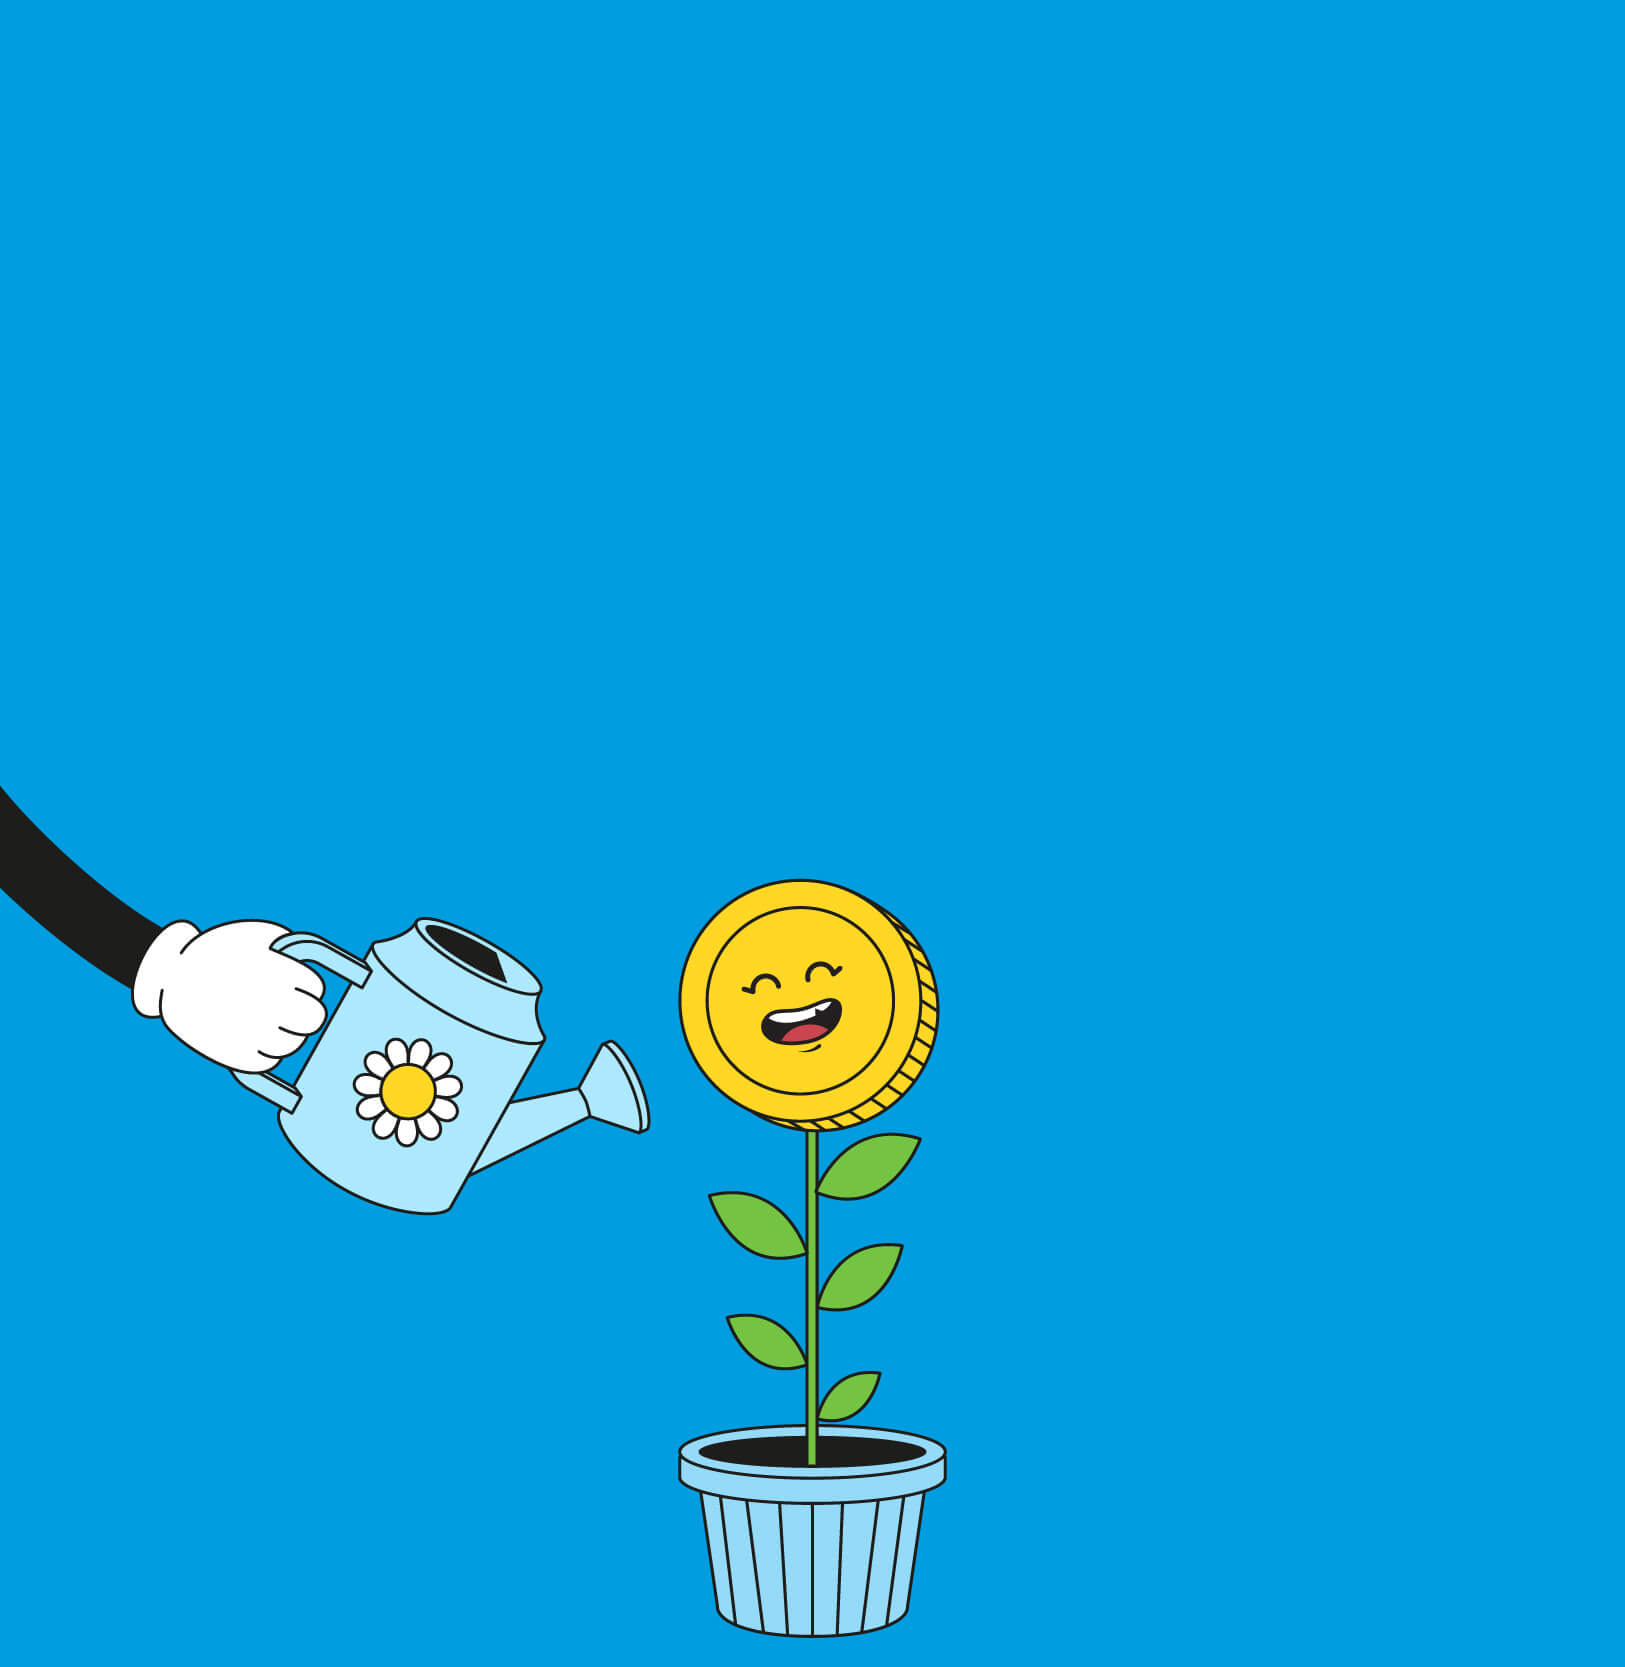 Cartoon graphic of an arm holding a watering can and watering a smiling flower in the shape of a coin.